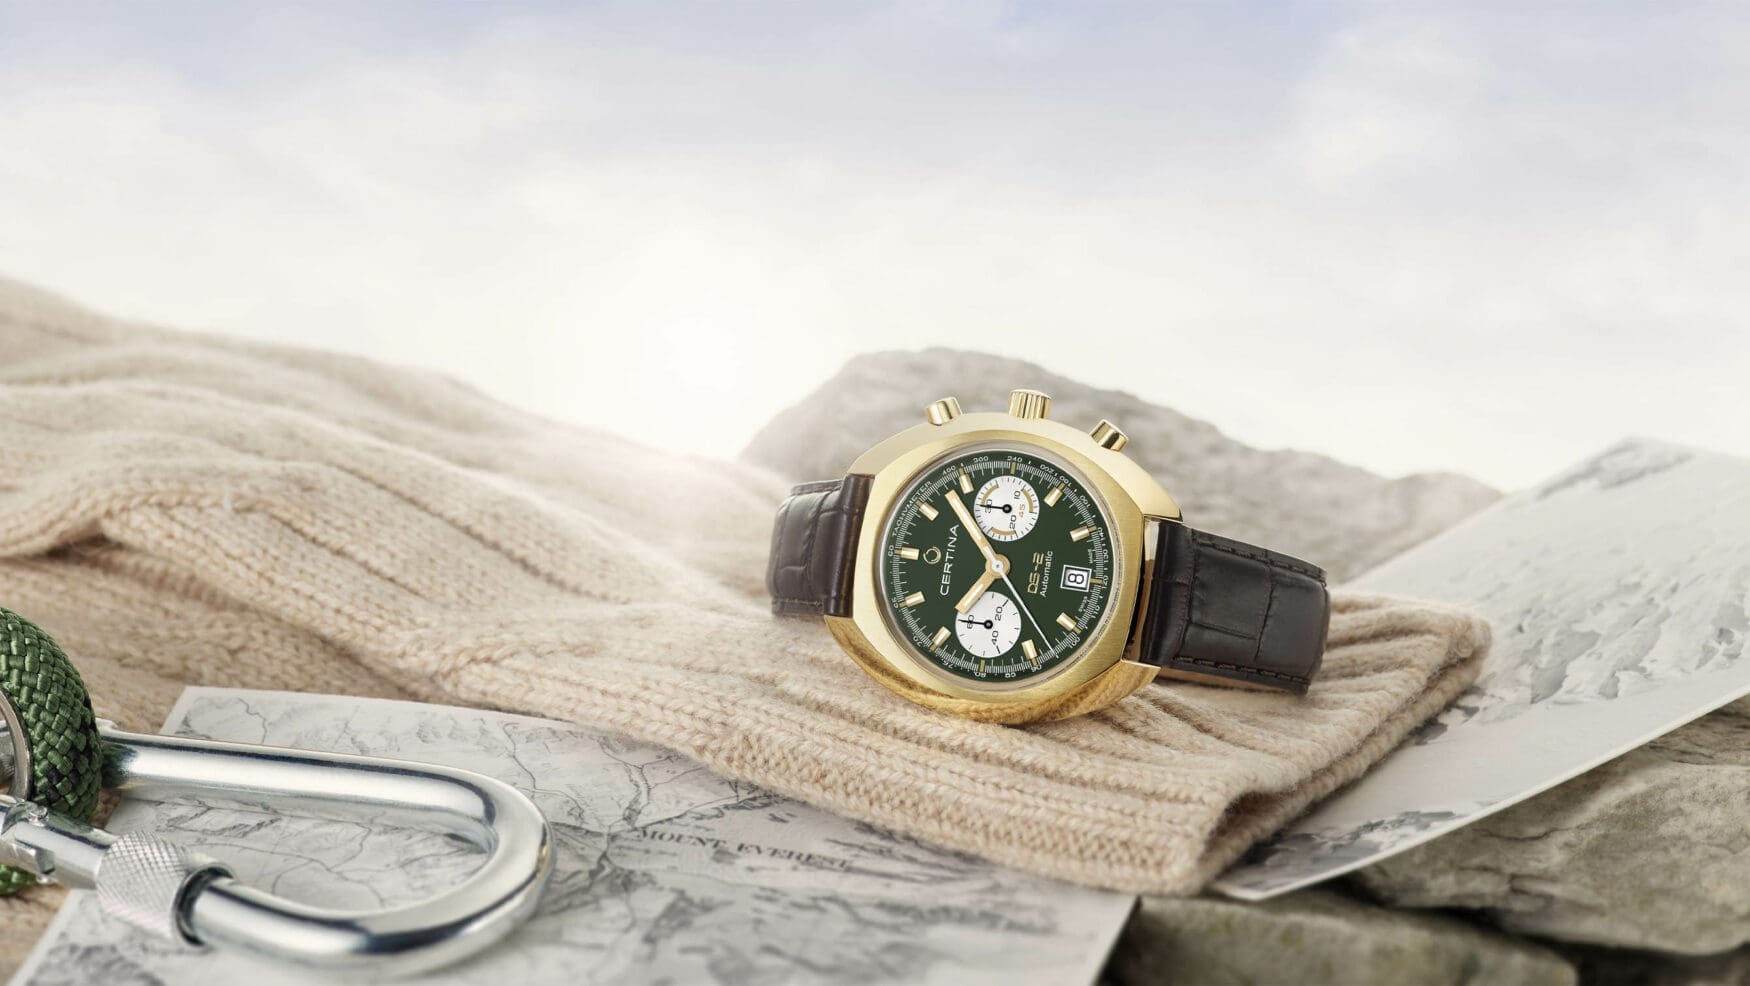 The Certina DS-2 Chronograph Automatic in green and gold is retro chic